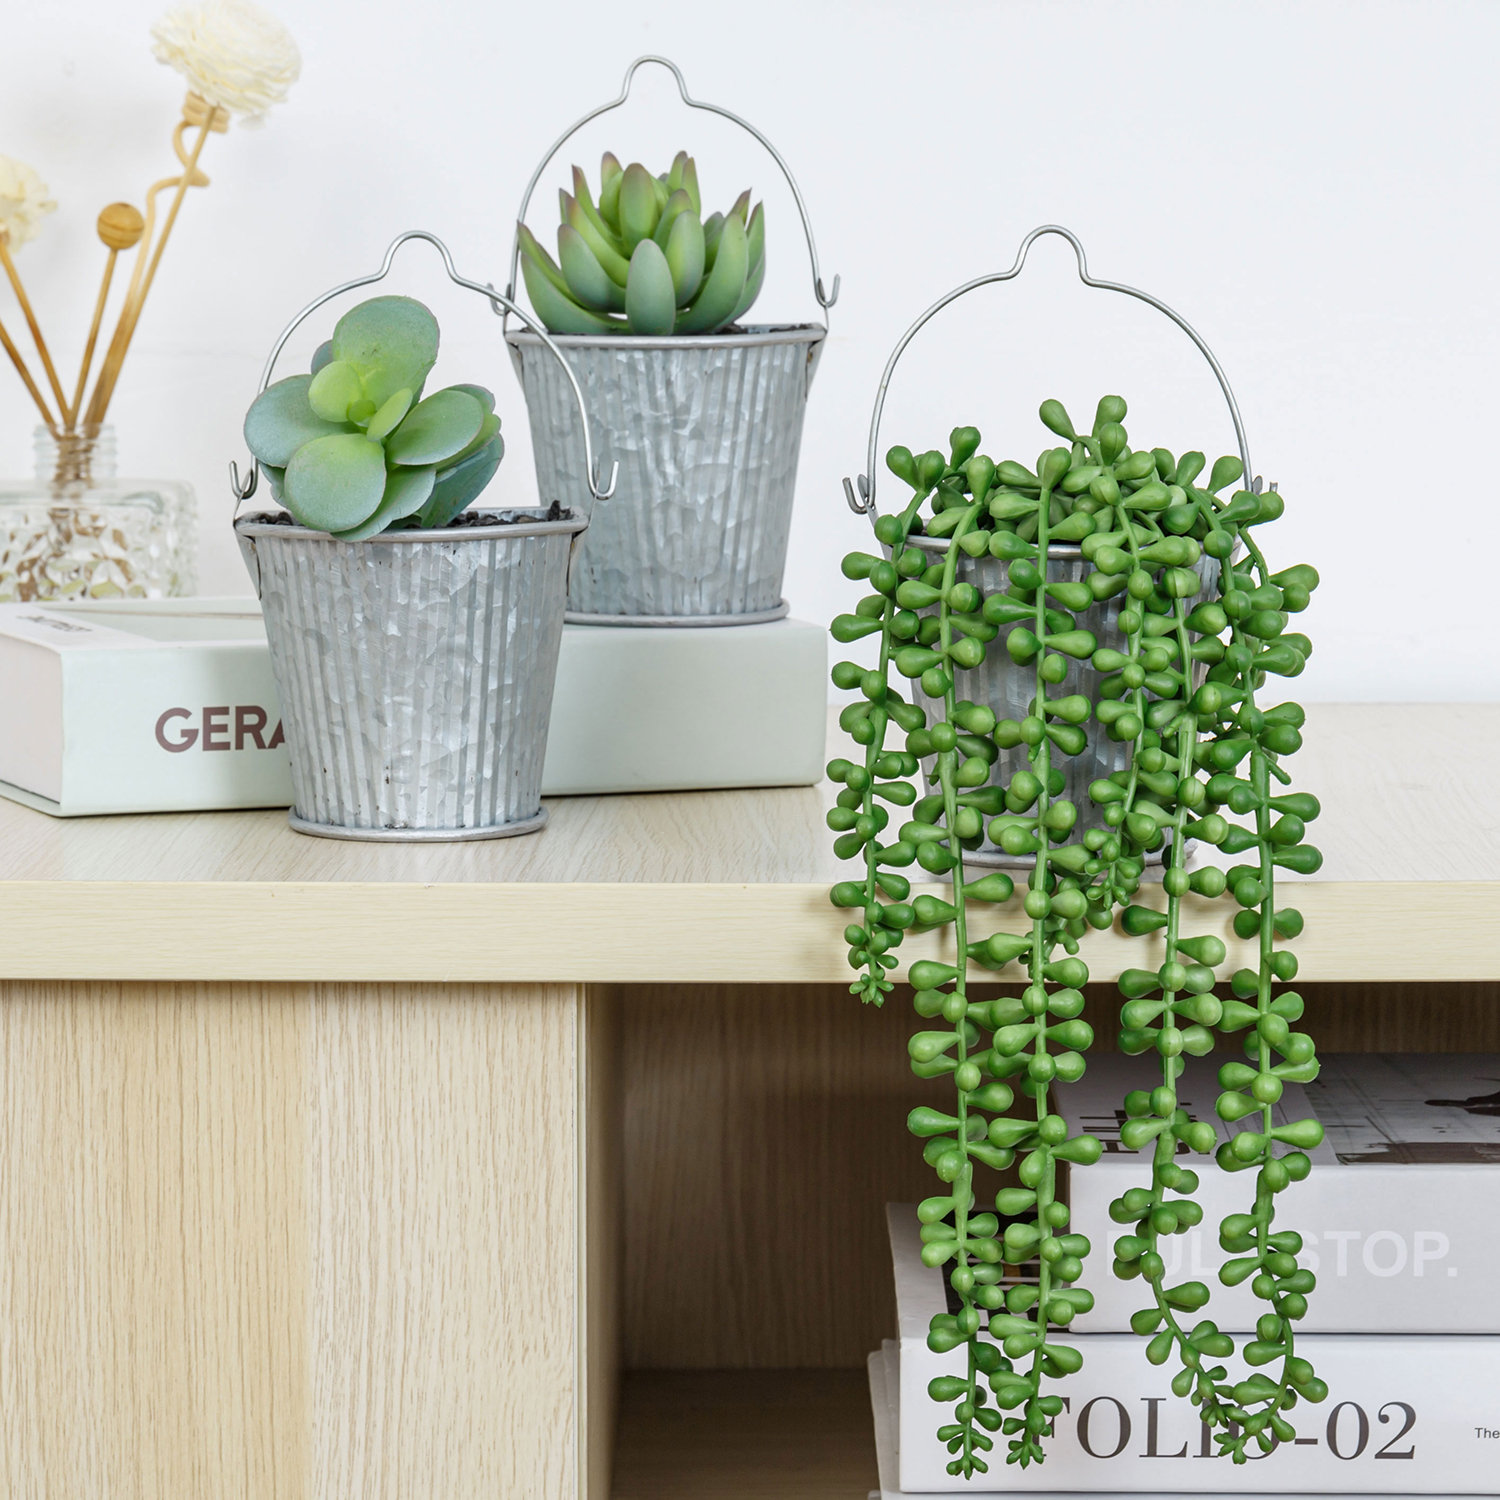  3pcs Artificial Fake String of Pearls Plant Faux Fake